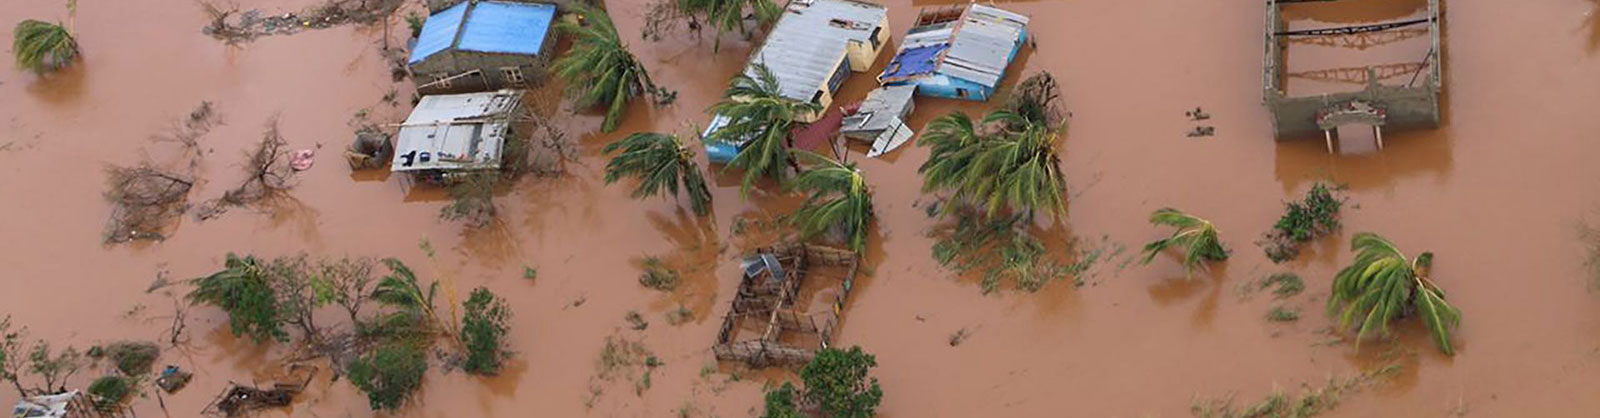 NRS Relief | Emergency Response - Mozambique Cyclone Idai